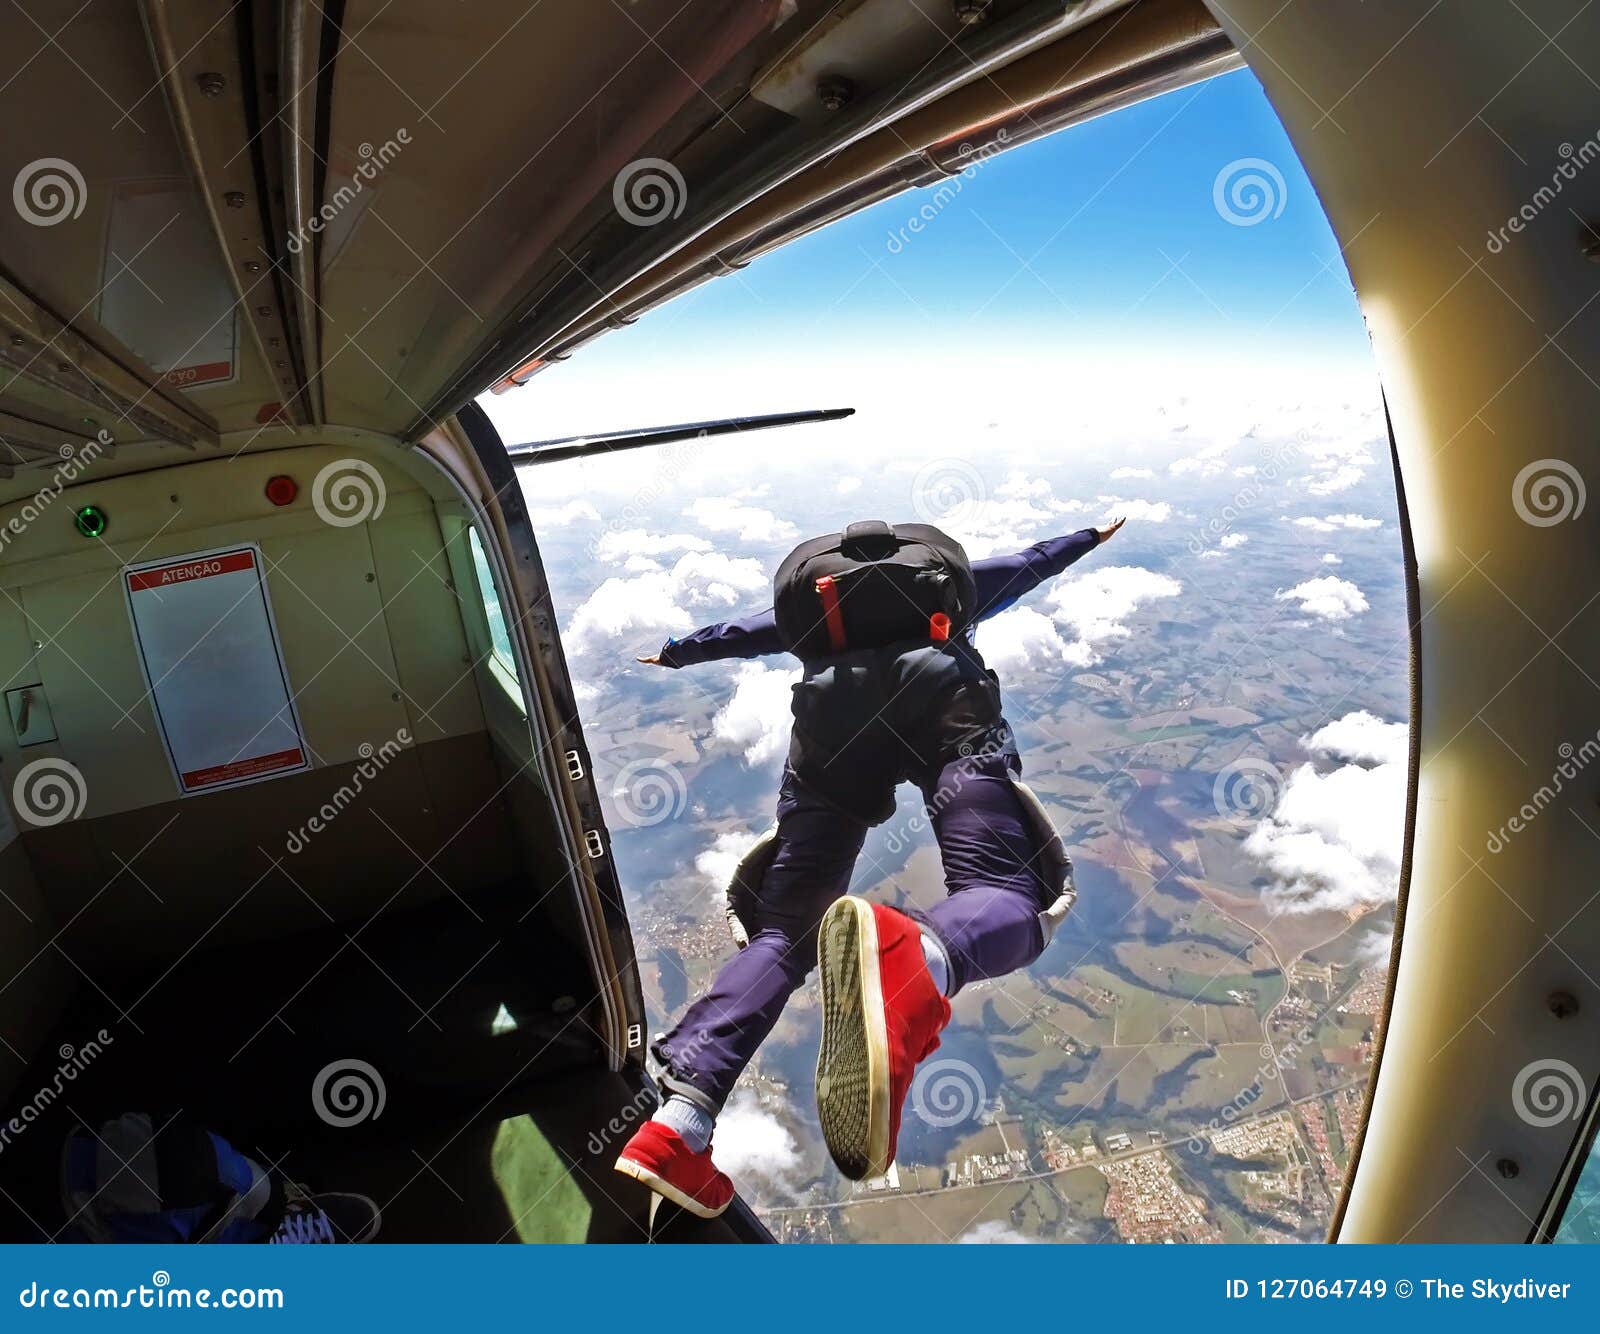 Albums 98+ Images jumping out of a plane with a parachute Stunning